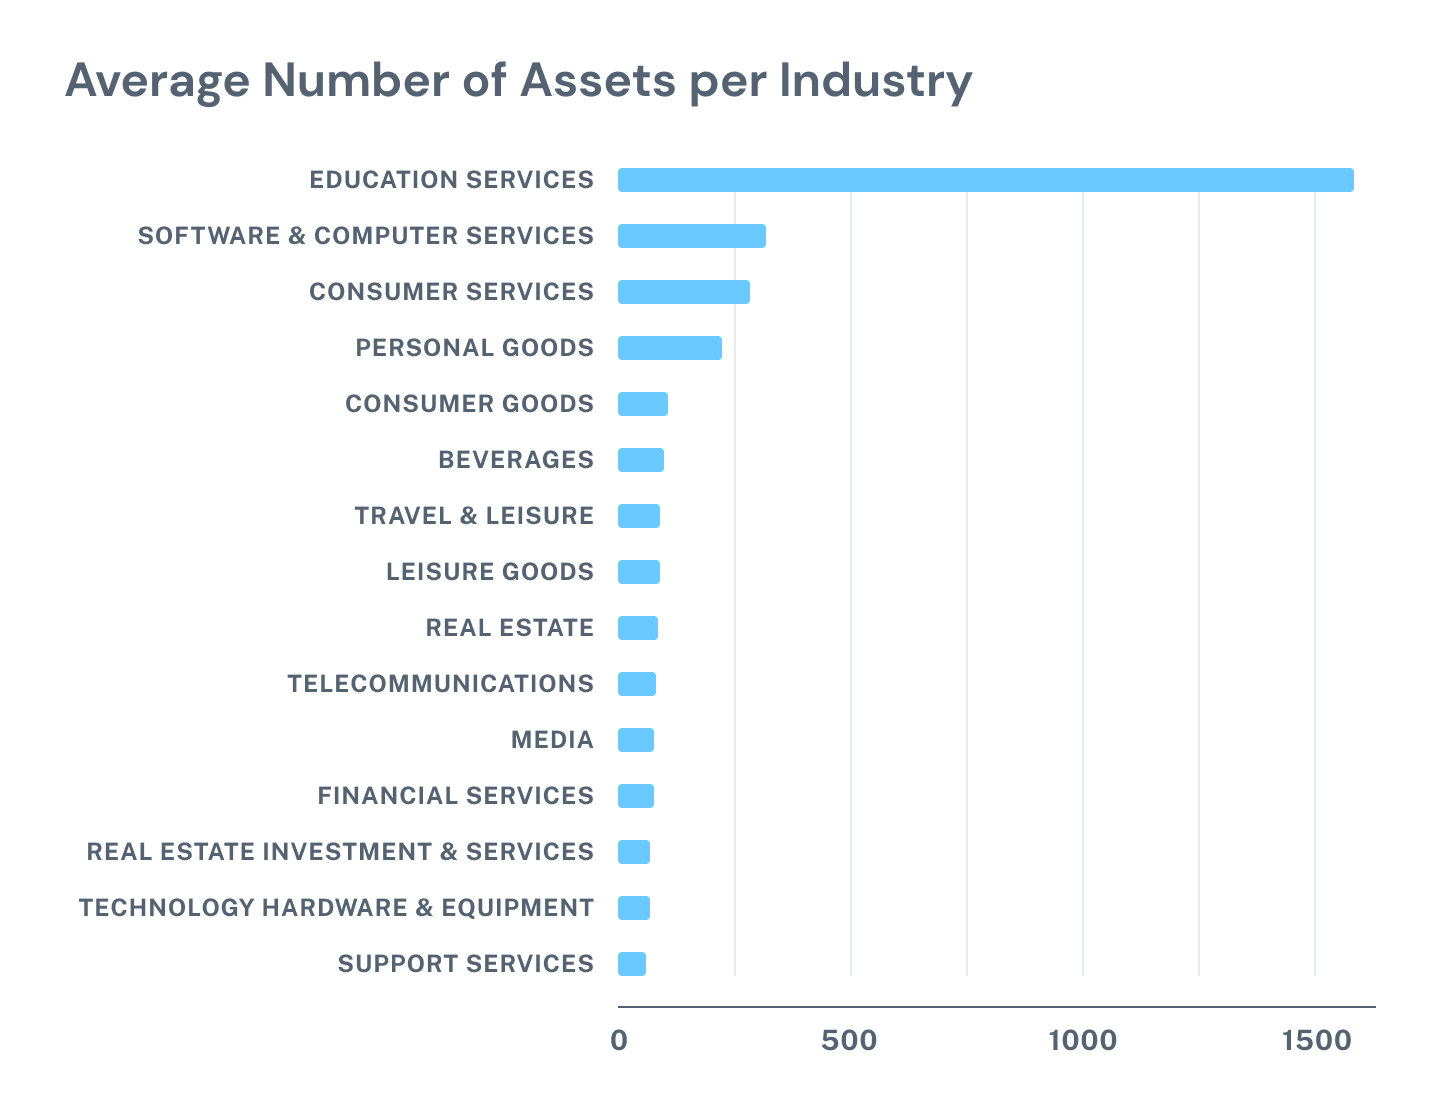 Avg-Num-of-Assets-per-Industry-1